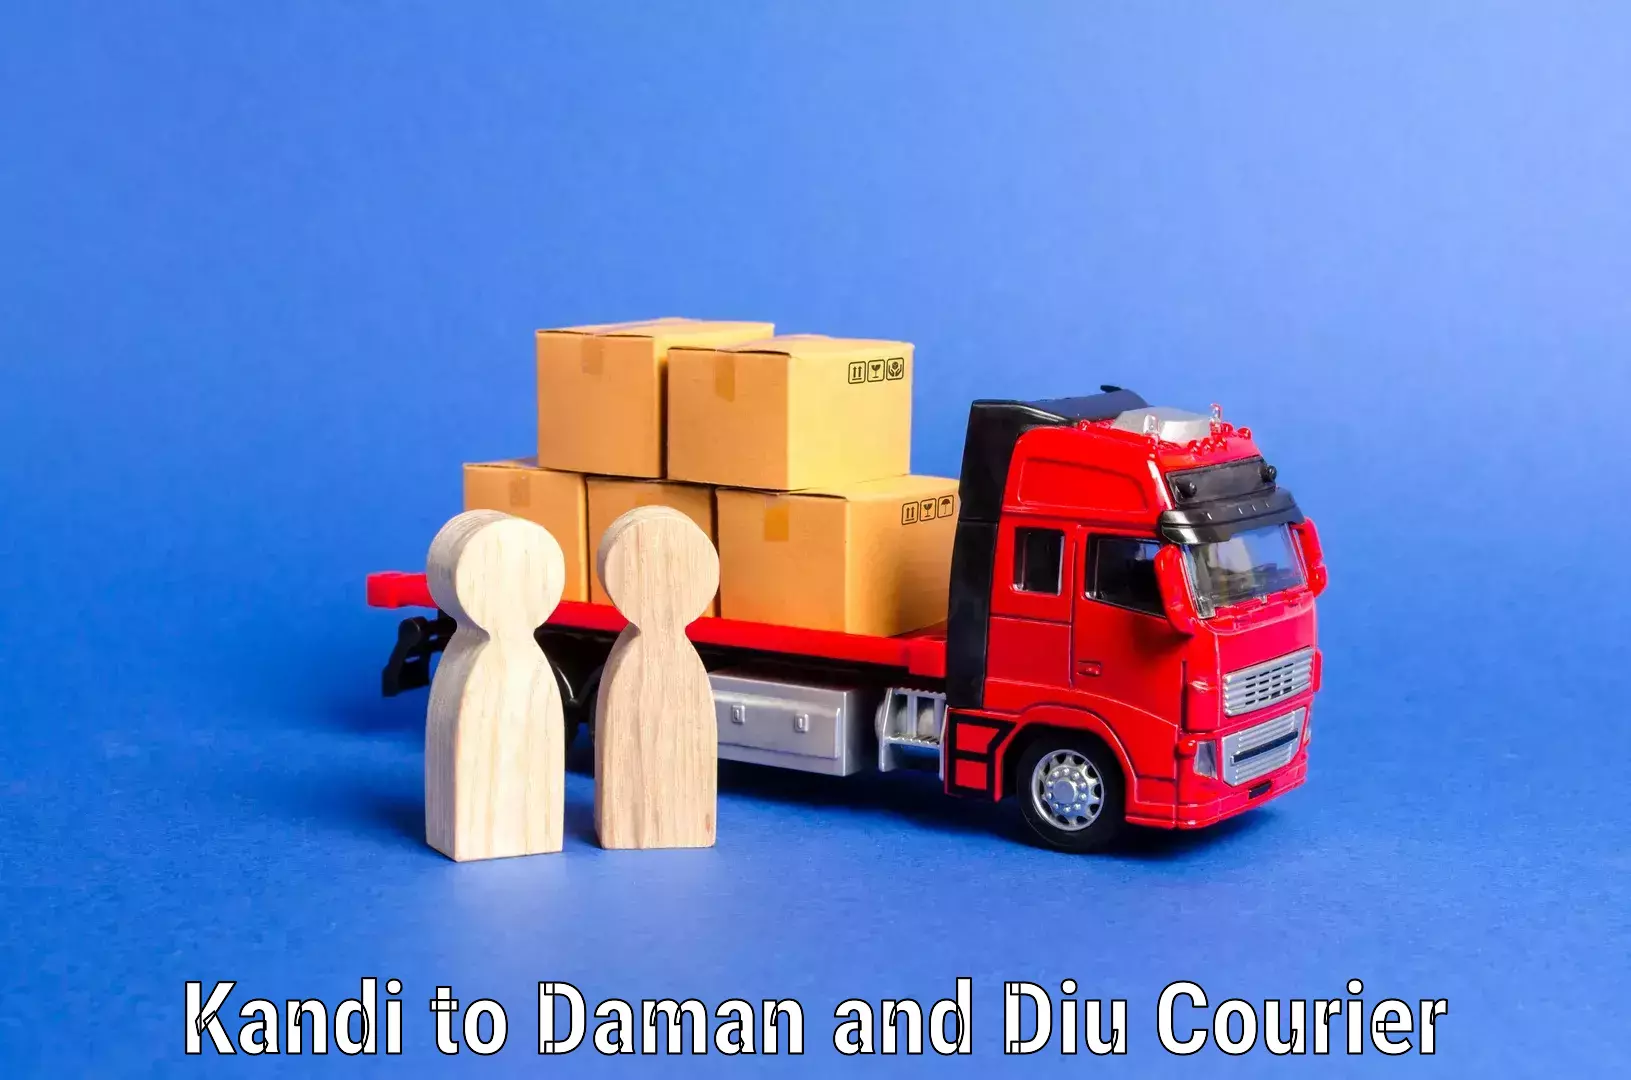 Specialized moving company Kandi to Daman and Diu